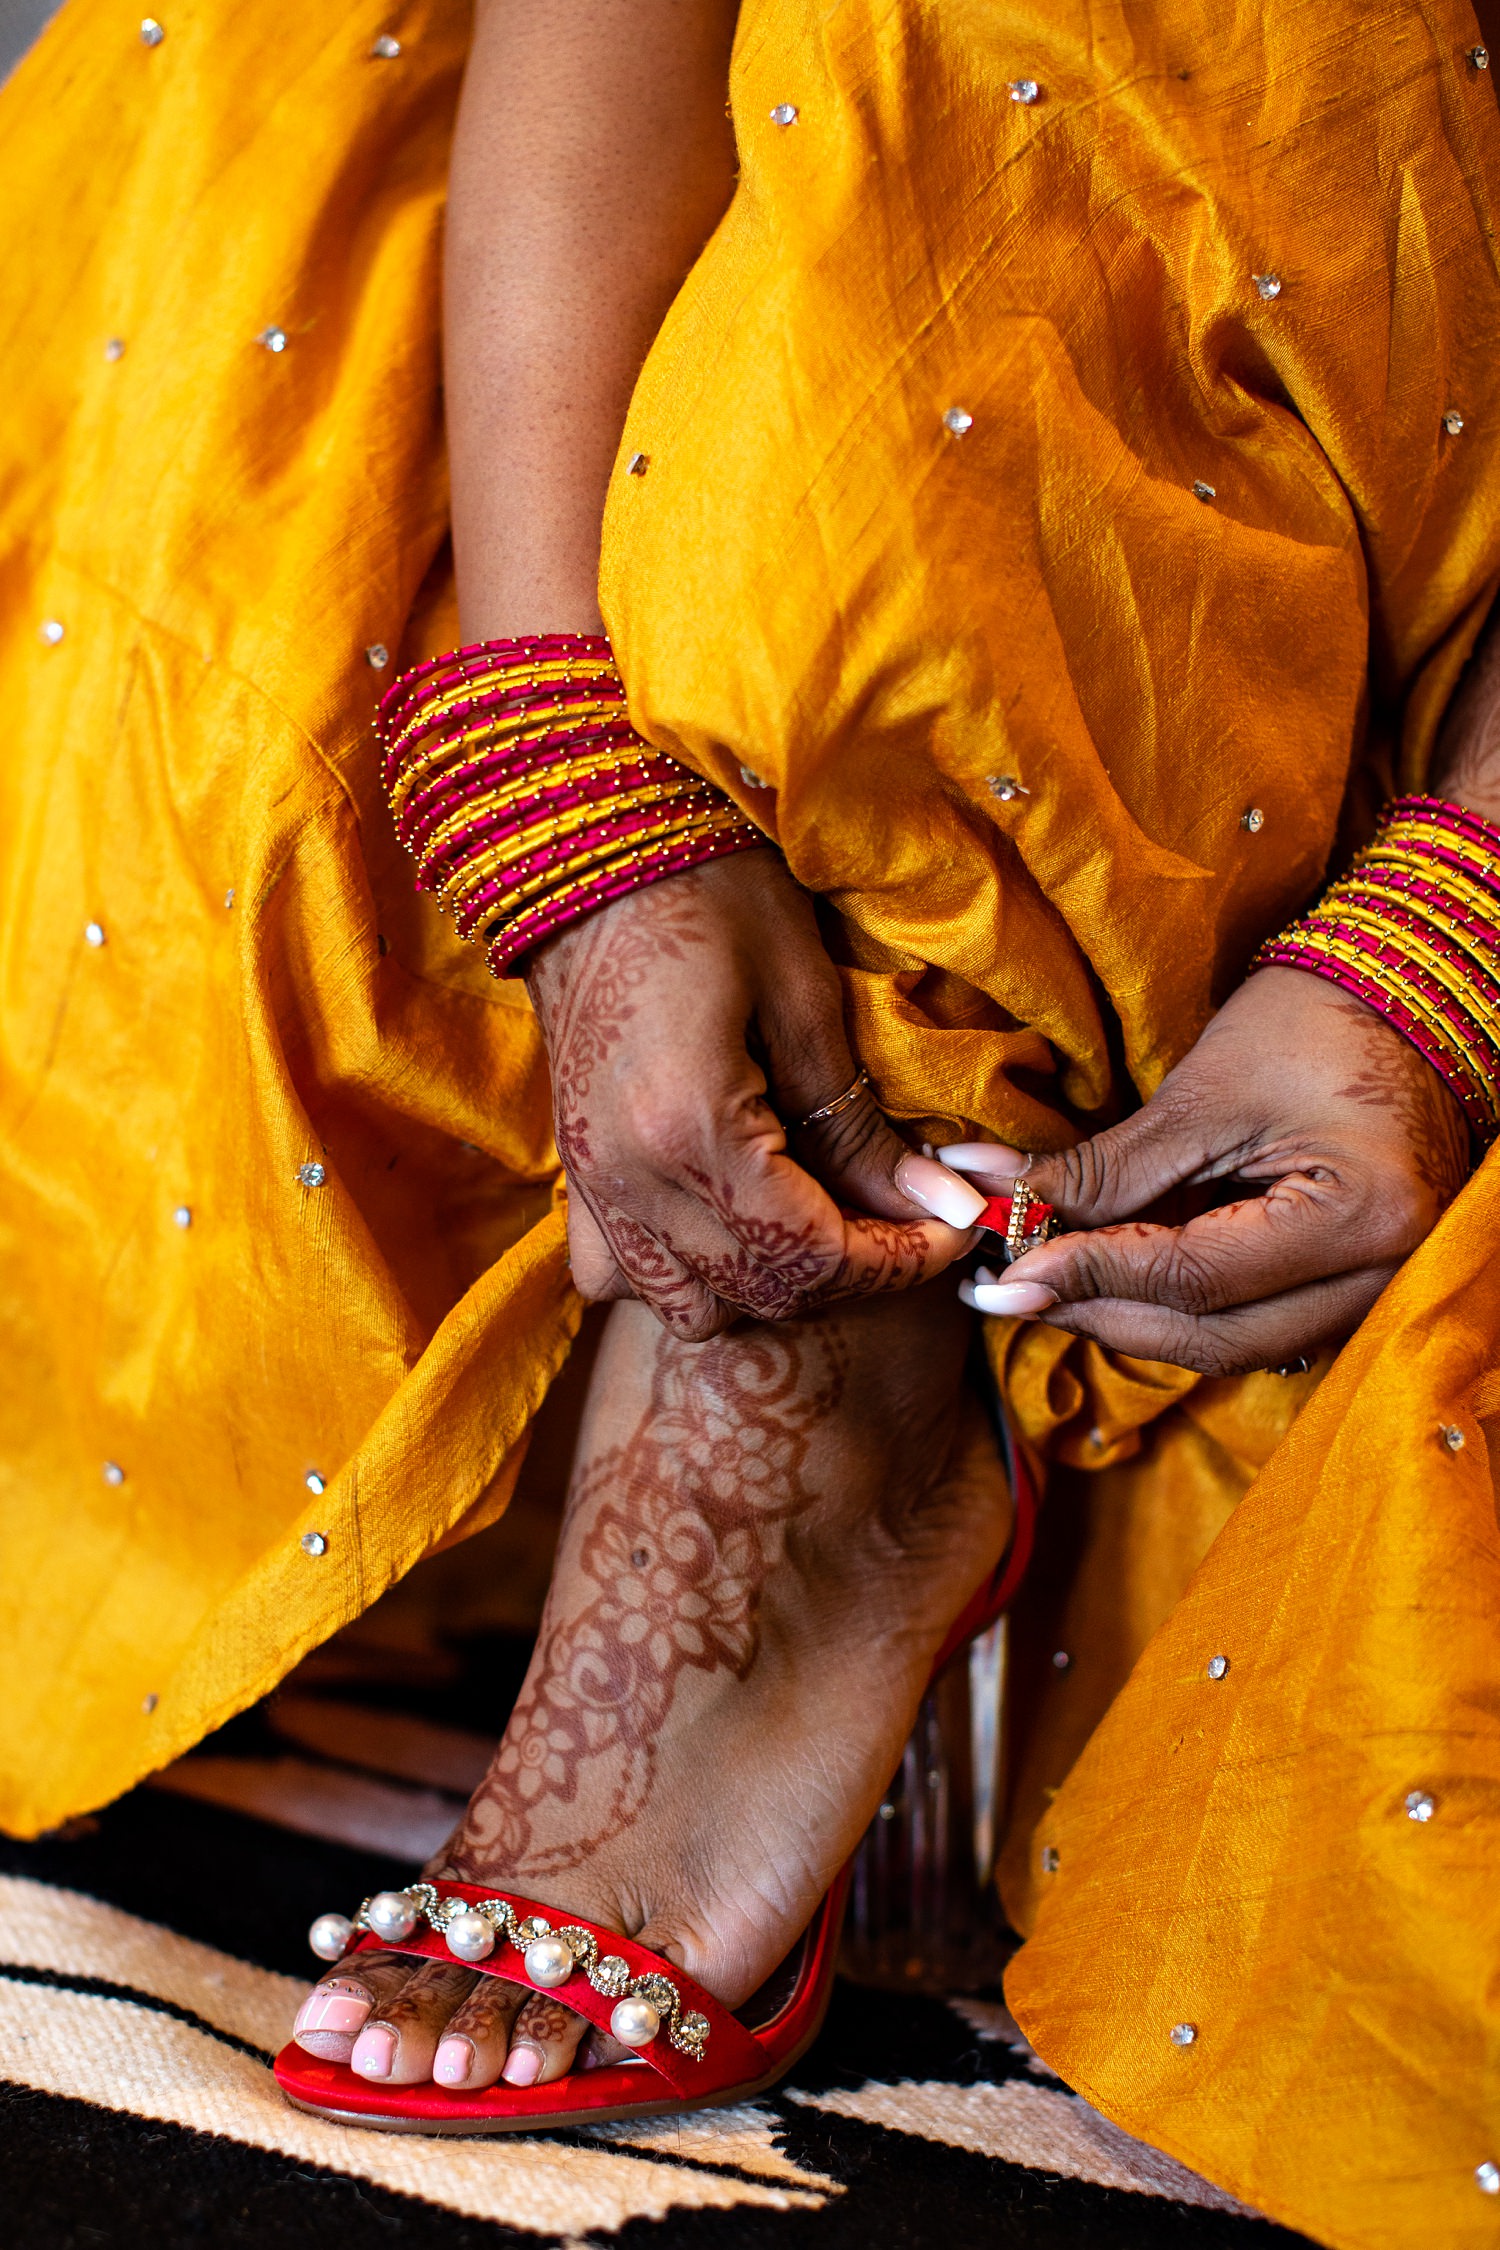 A Hindu Indian bride lifts her mustard yellow dress to expose henna decorations on her feet whilst she fastens the buckle on her red Louboutin shoes